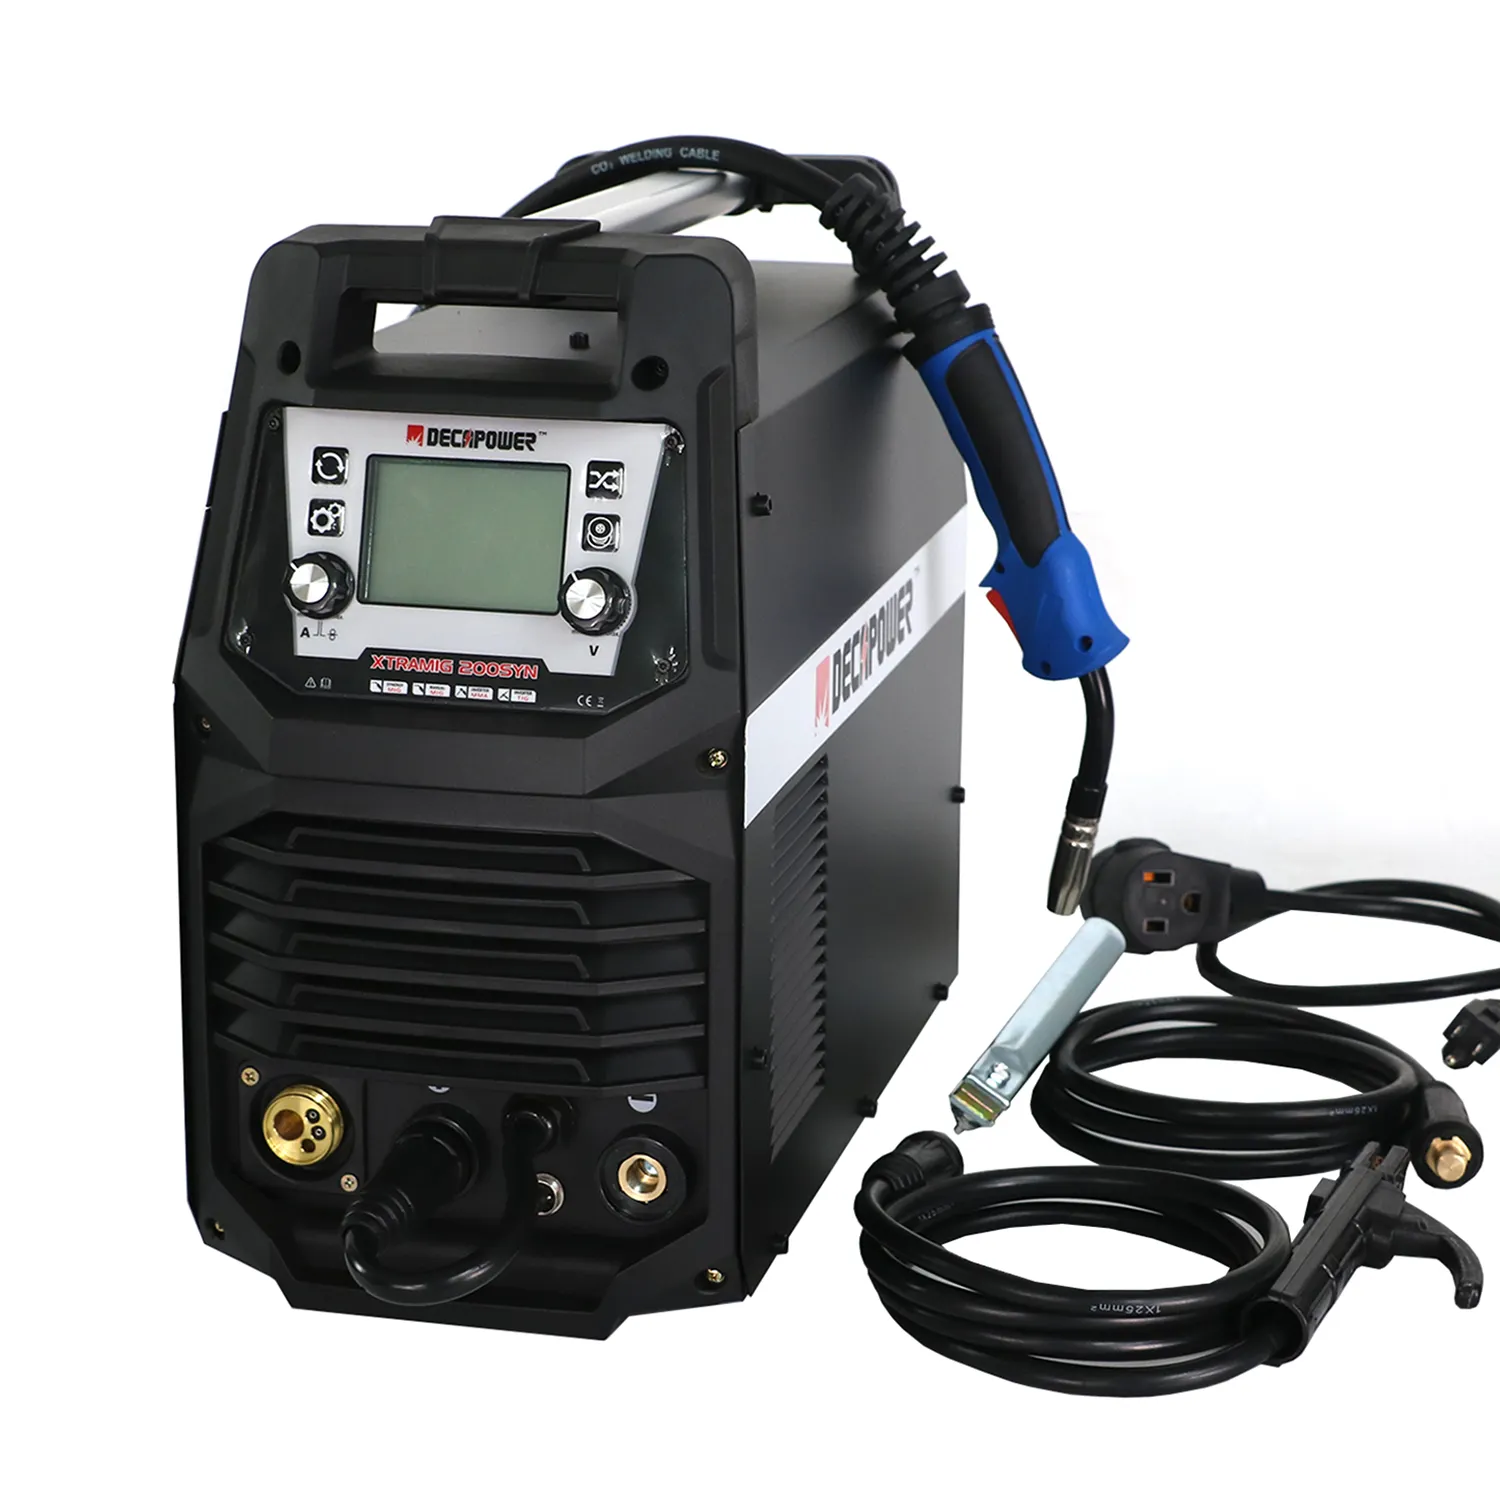 Decapower ALL-IN-ONE 110V/220V 200A CO2 GASLESS Aluminum MIG WELDING MACHINE (XTRAMIG-200 SYN)